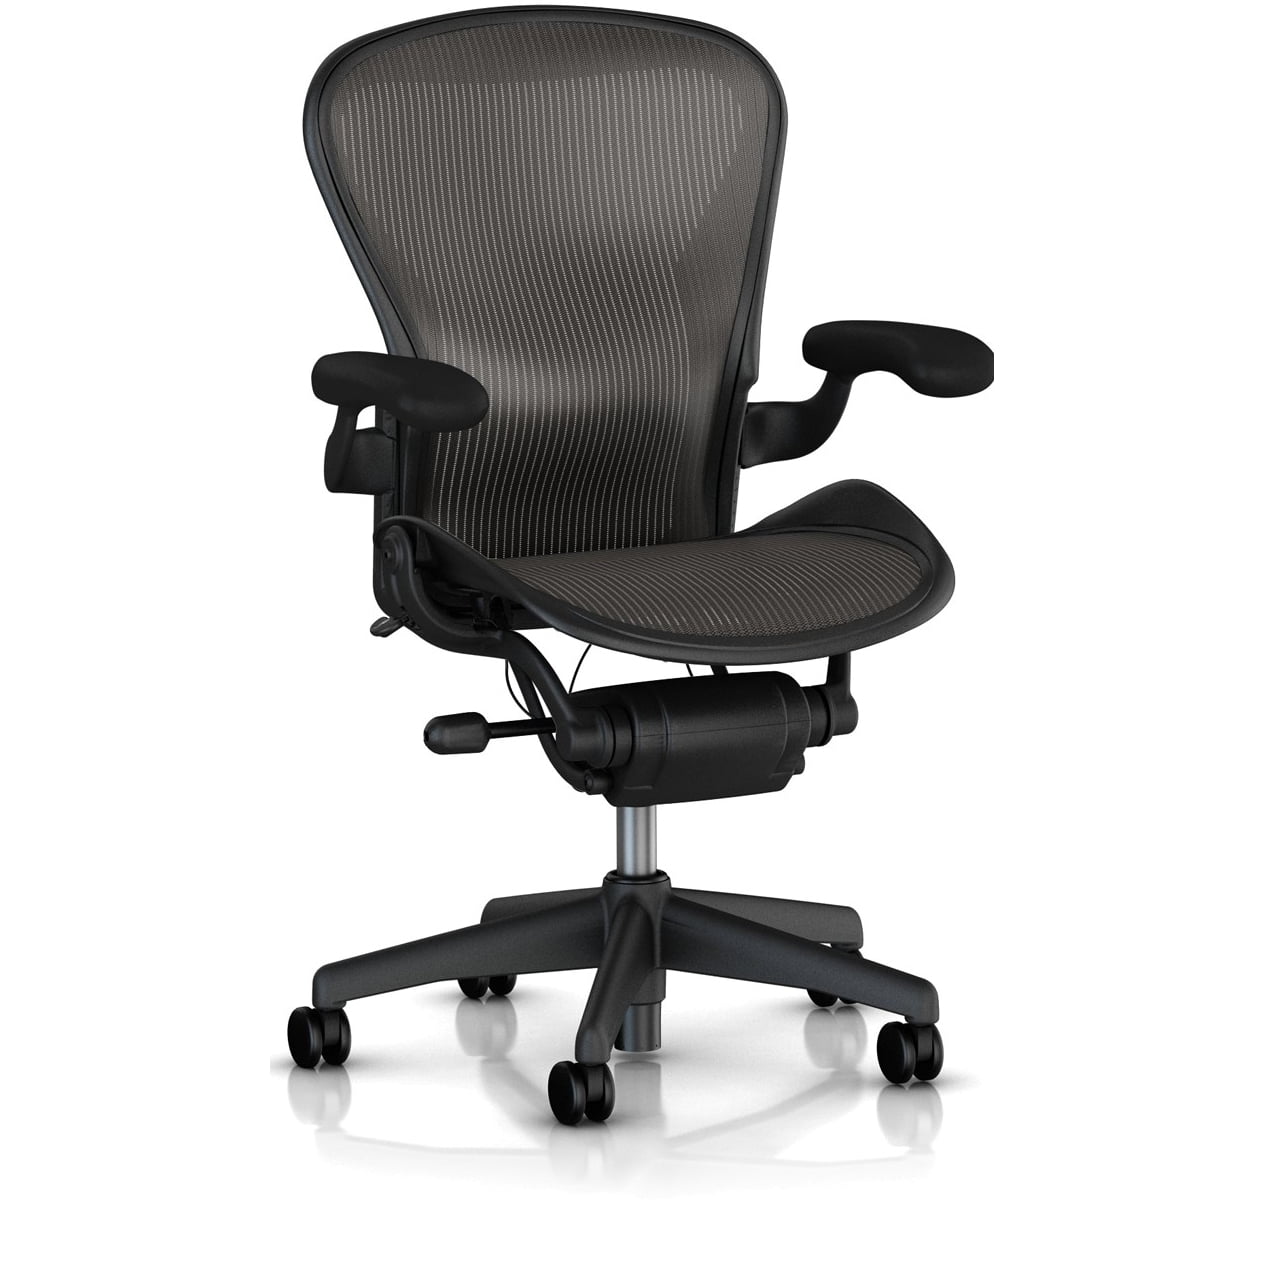 Size B Lumbar Pad Support for Herman Miller Aeron Chair Medium - Two dots on Back Lip OfficeLogixShop - Graphite Color 